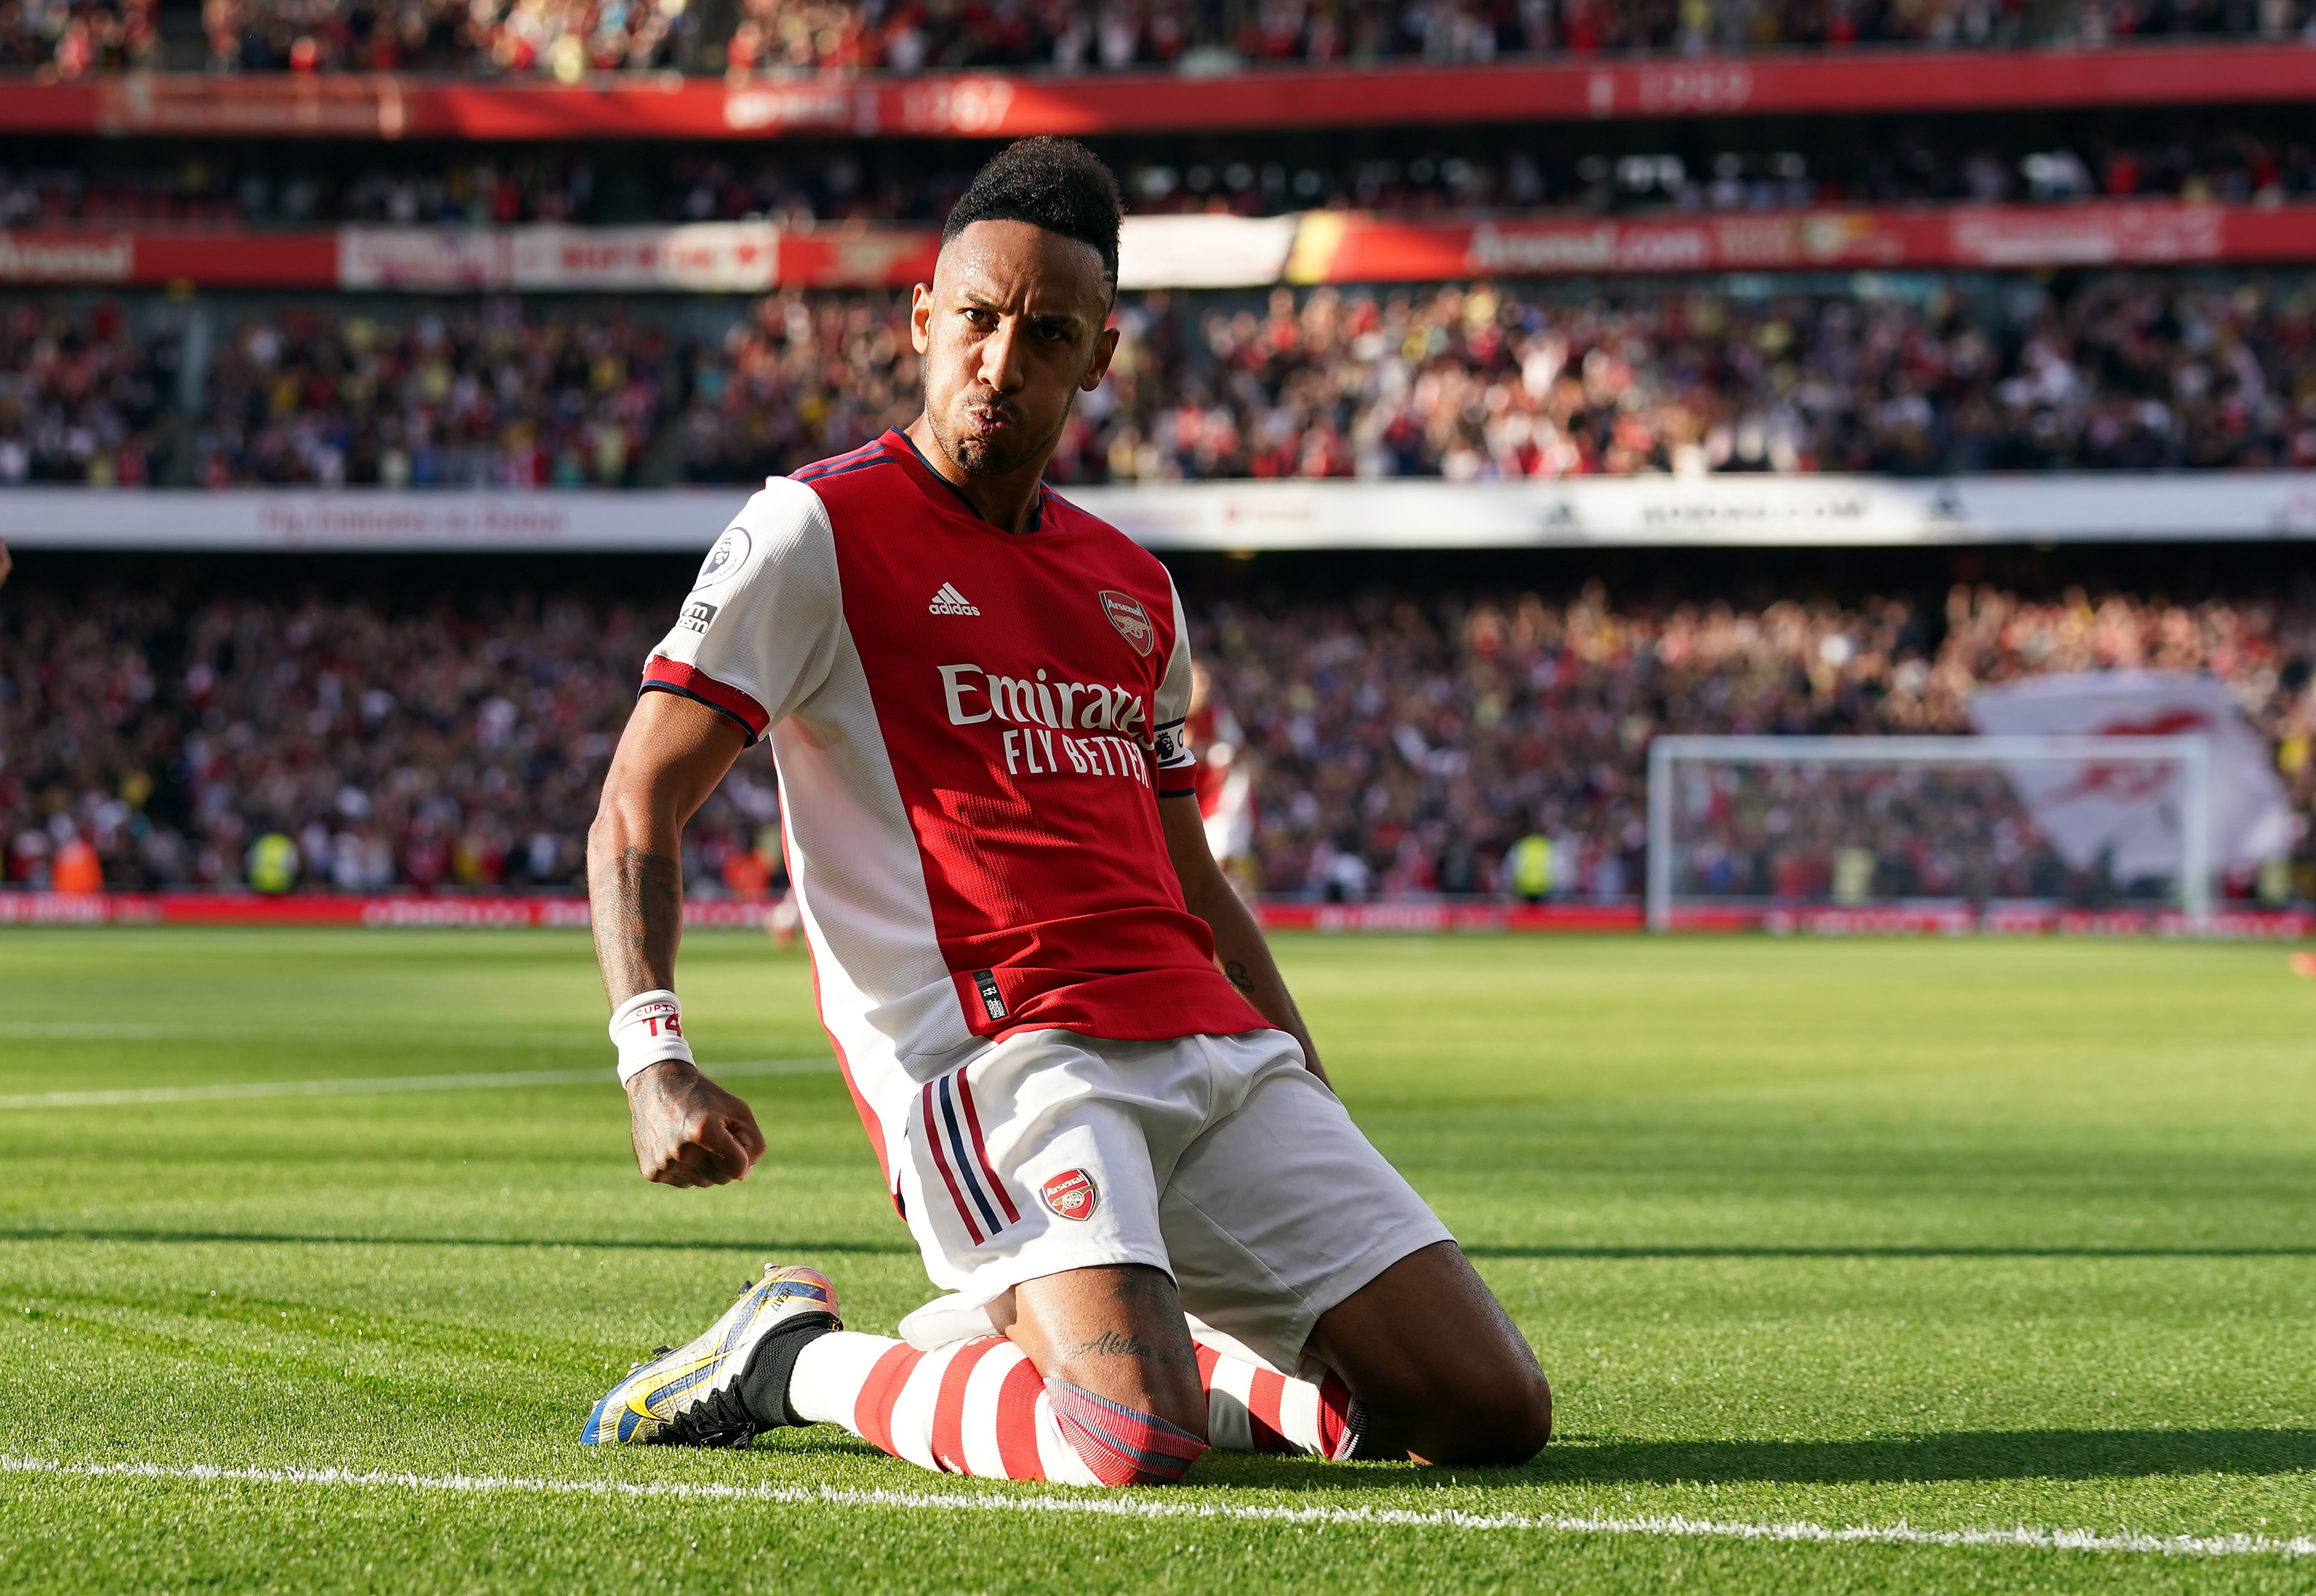 Arteta feels Aubameyang (pictured) has stepped up as a leader of the team (Nick Potts/PA)